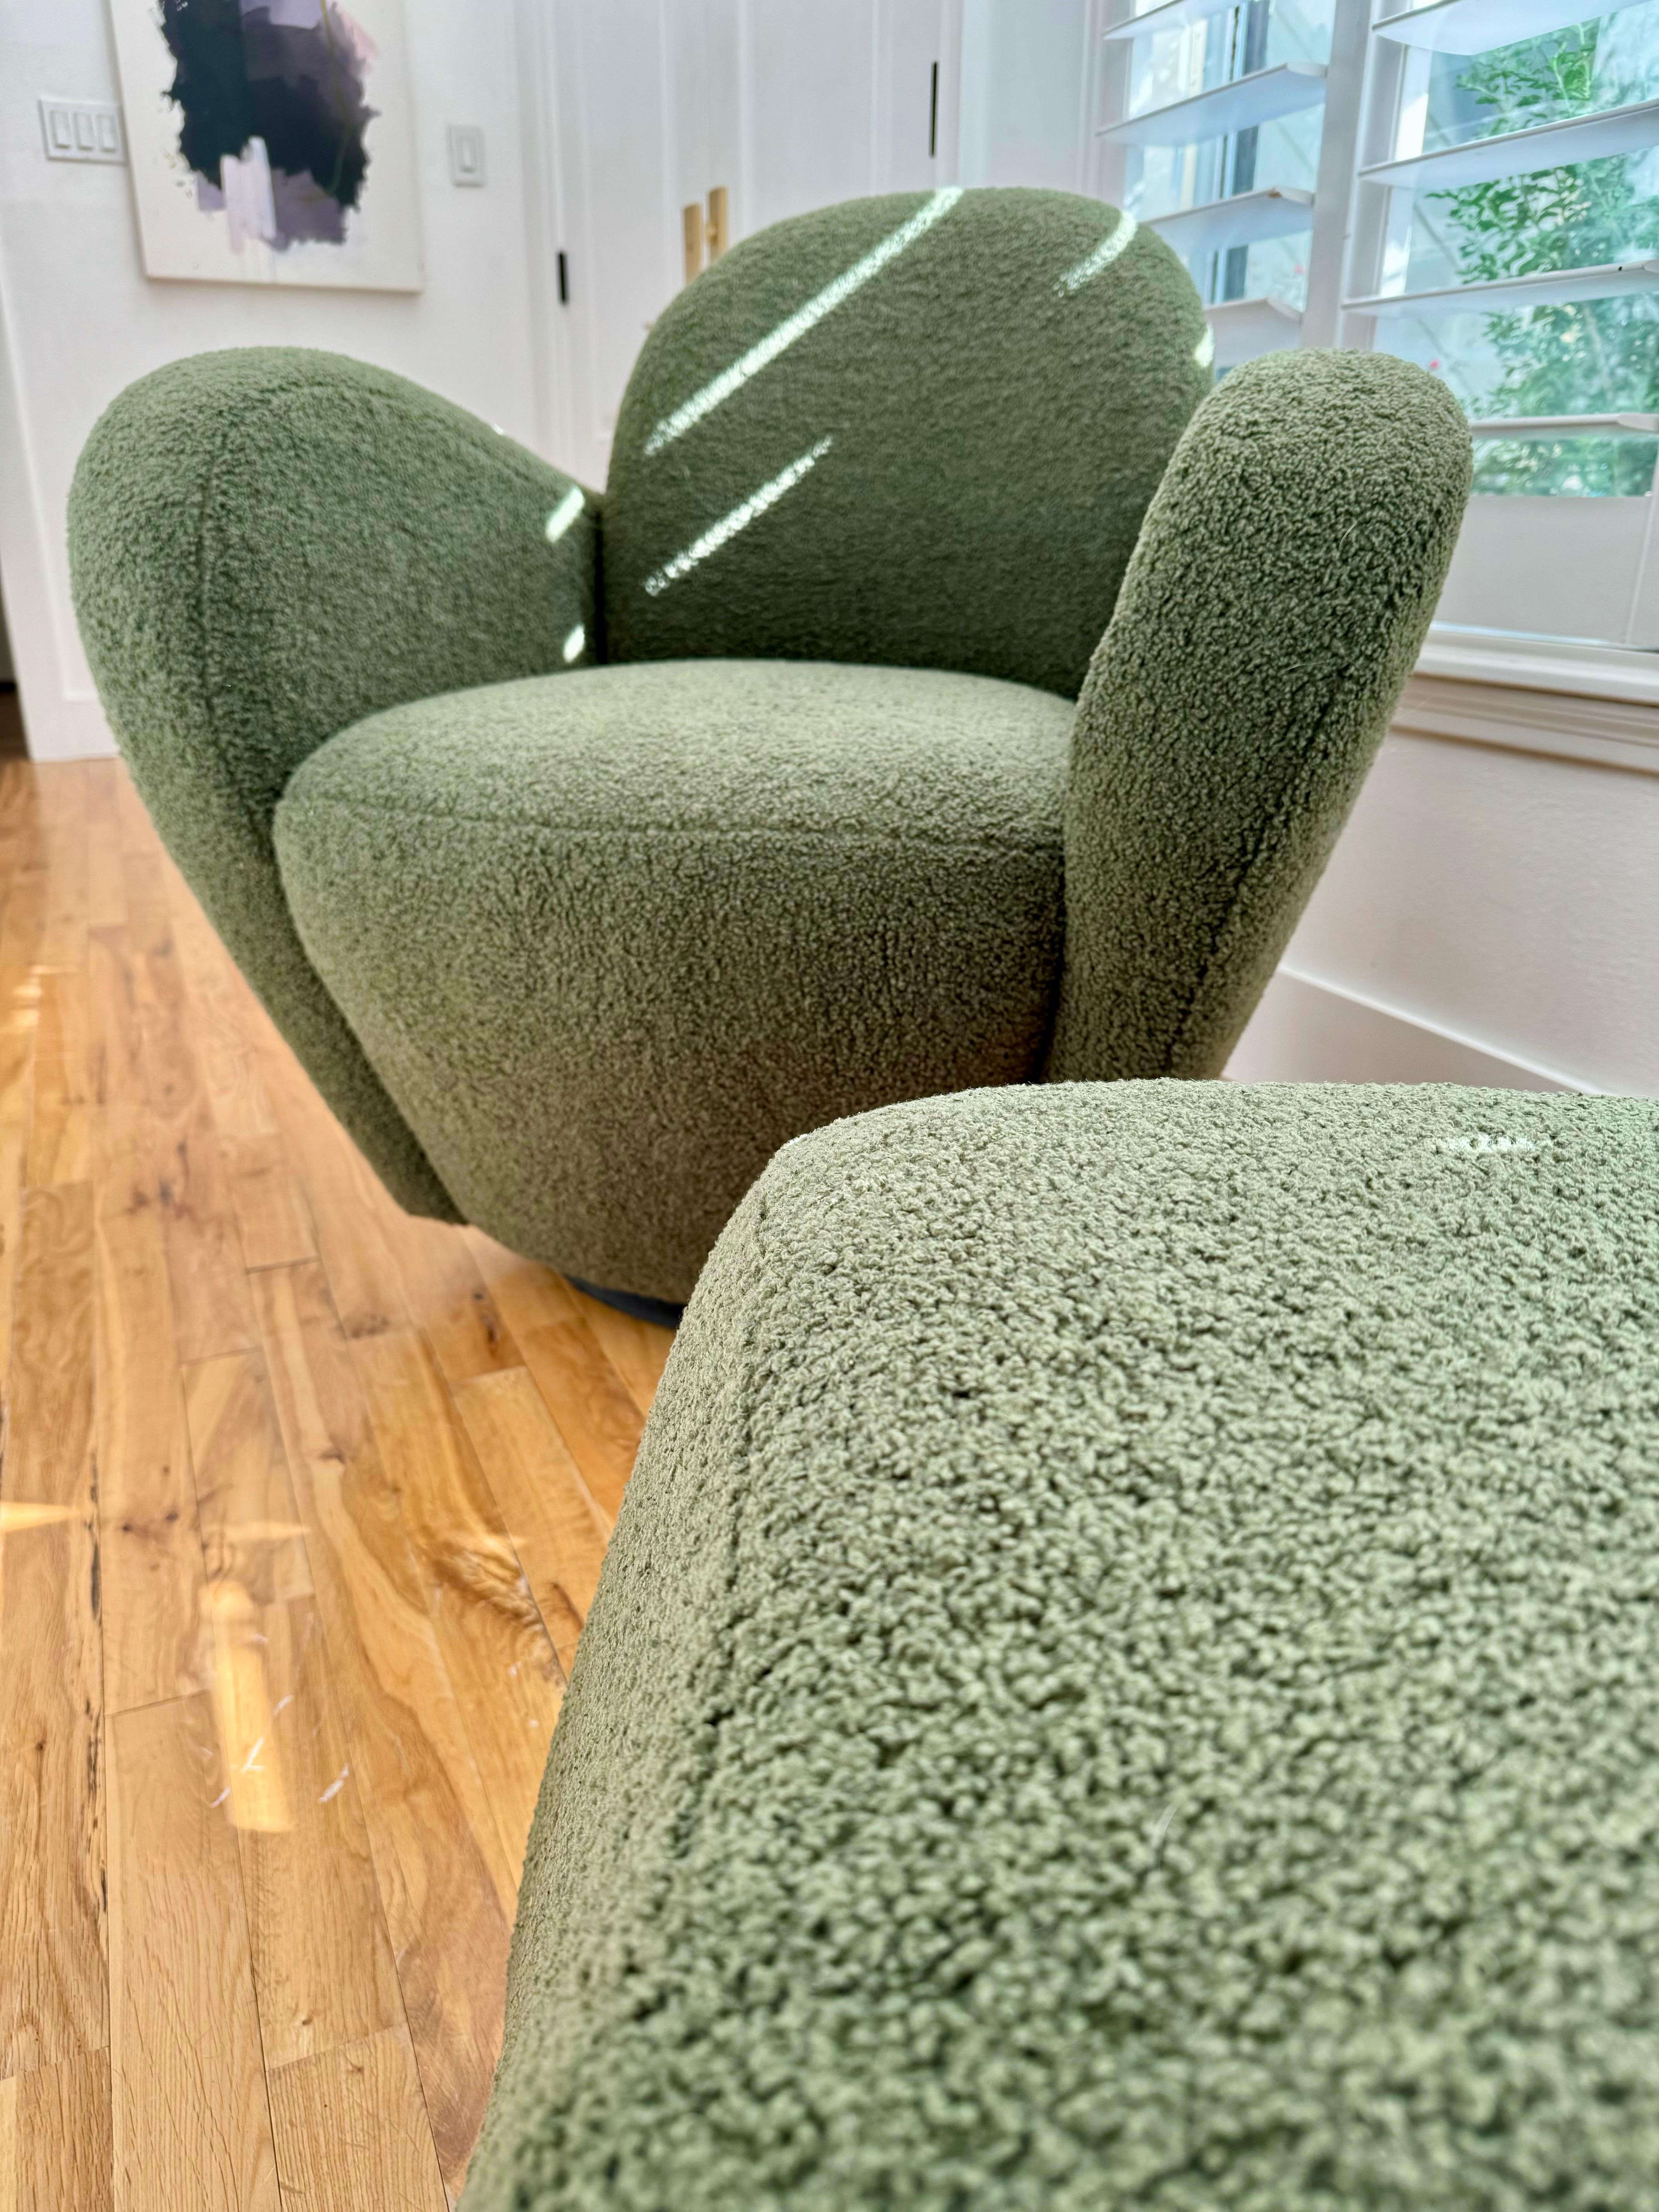 Highly sought after 'Miami' chair and ottoman designed by Michael Wolk for Preview c.1980s. These pieces have been reupholstered in a luxurious olive bouclé. This iconic duo is soft, plush, and a dream to lounge in. Chair features a return-to-zero